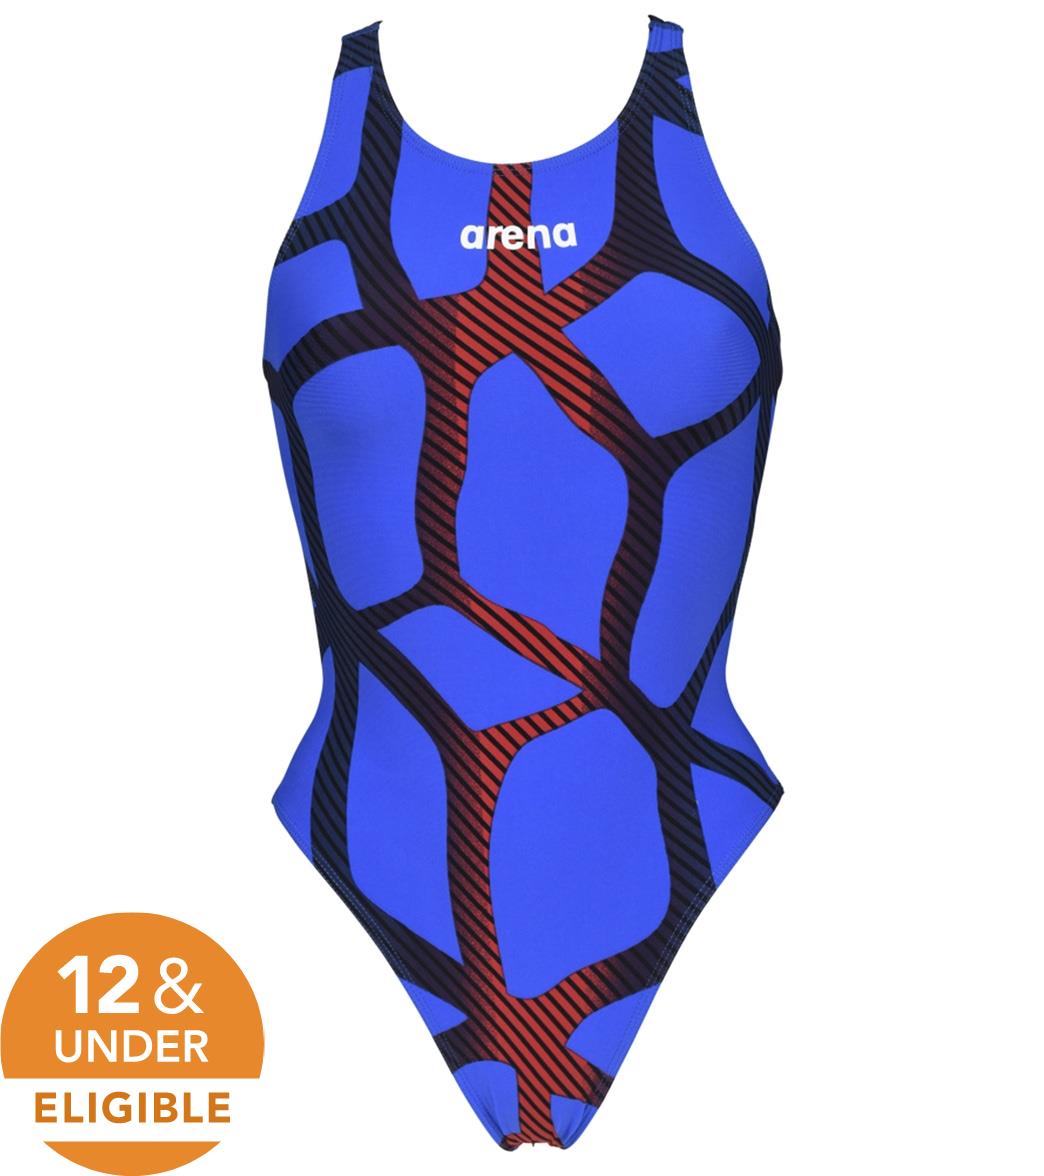 Arena Women's Powerskin St Classic Limited Edition Tech Suit Swimsuit - Royal-Red 26 Royal/Red Elastane/Polyamide - Swimoutlet.com